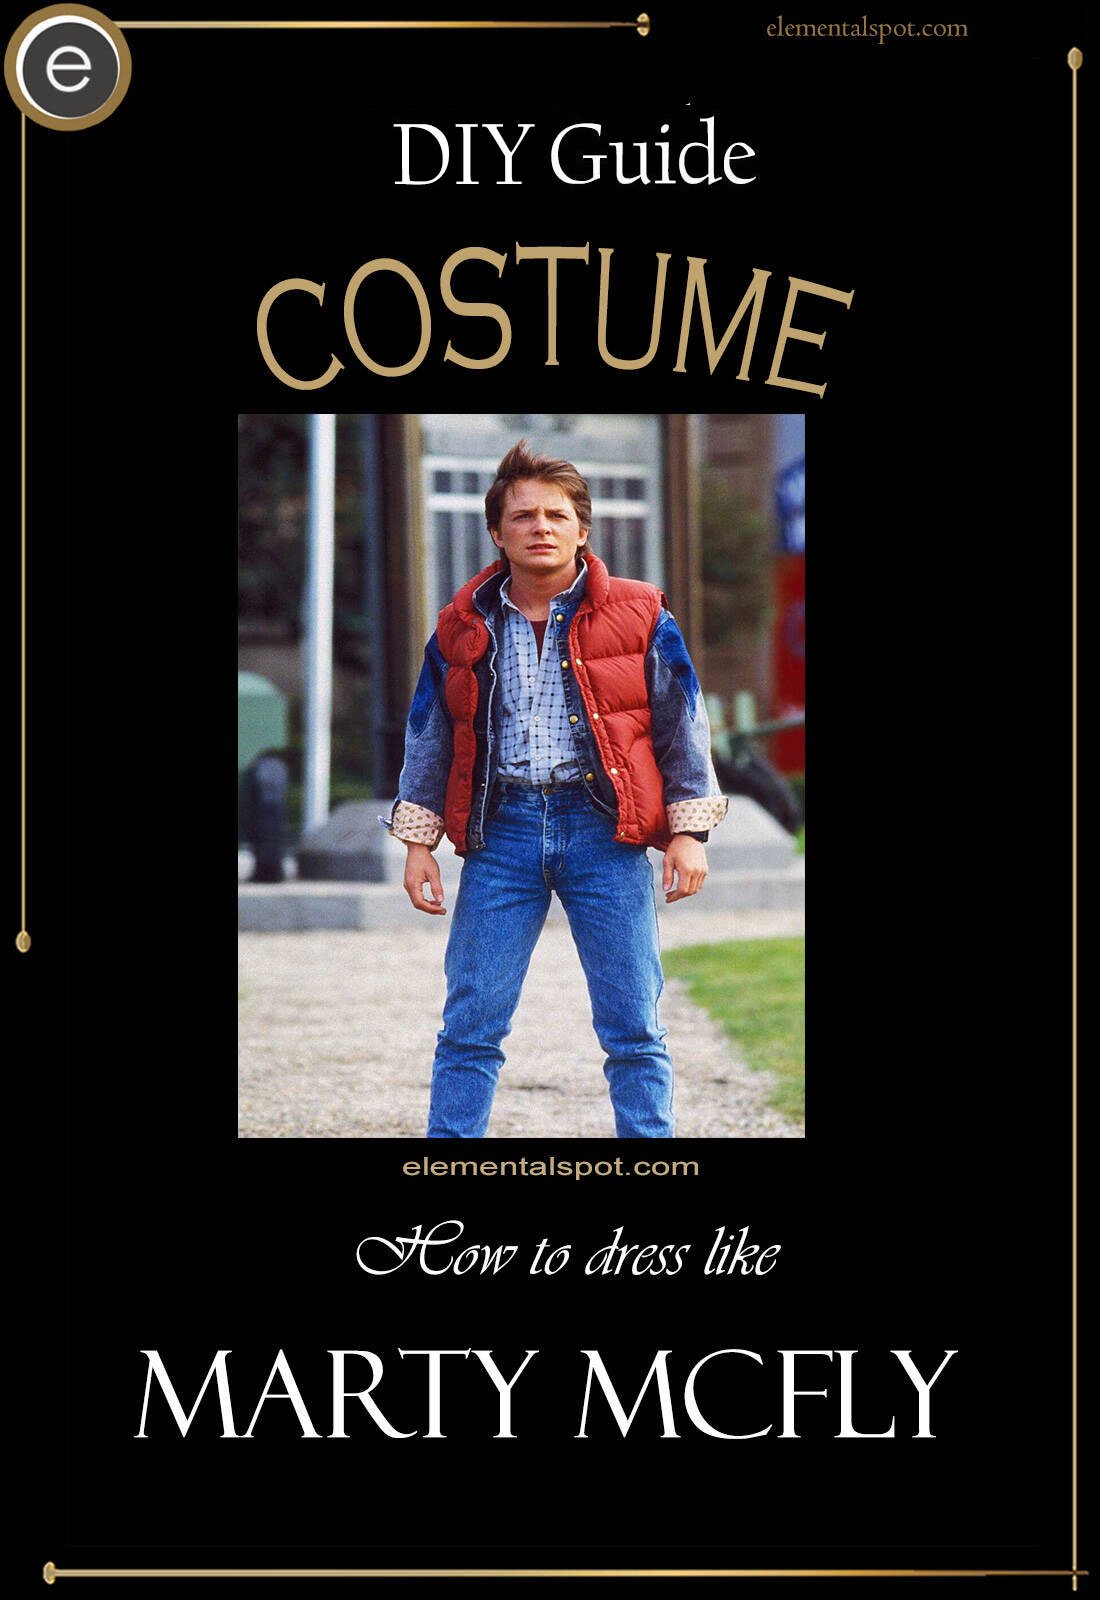 Dress Up Like Marty Mcfly from Back To The Future - Elemental Spot